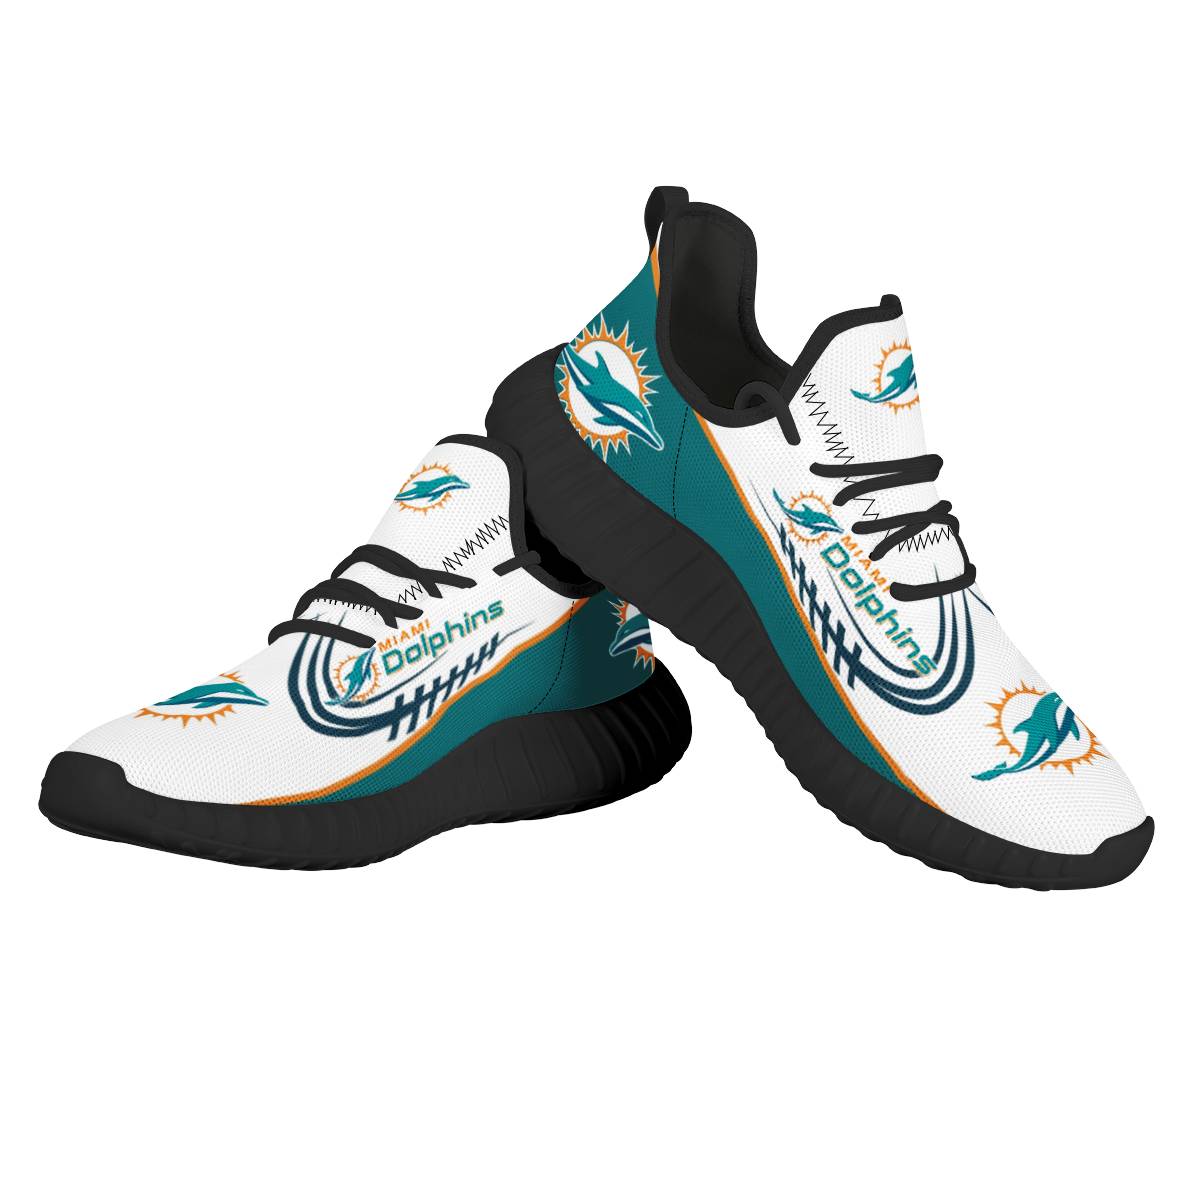 Men's NFL Miami Dolphins Mesh Knit Sneakers/Shoes 001